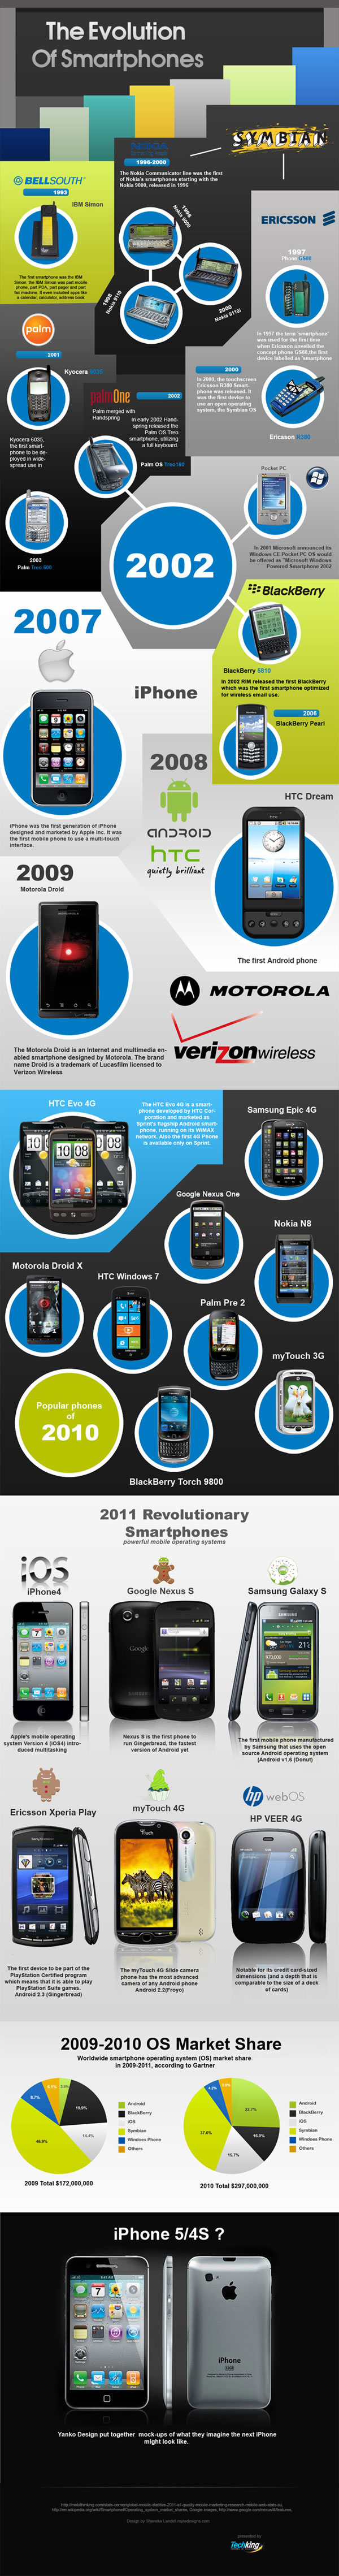 The Evolution of Smartphones – Infographic